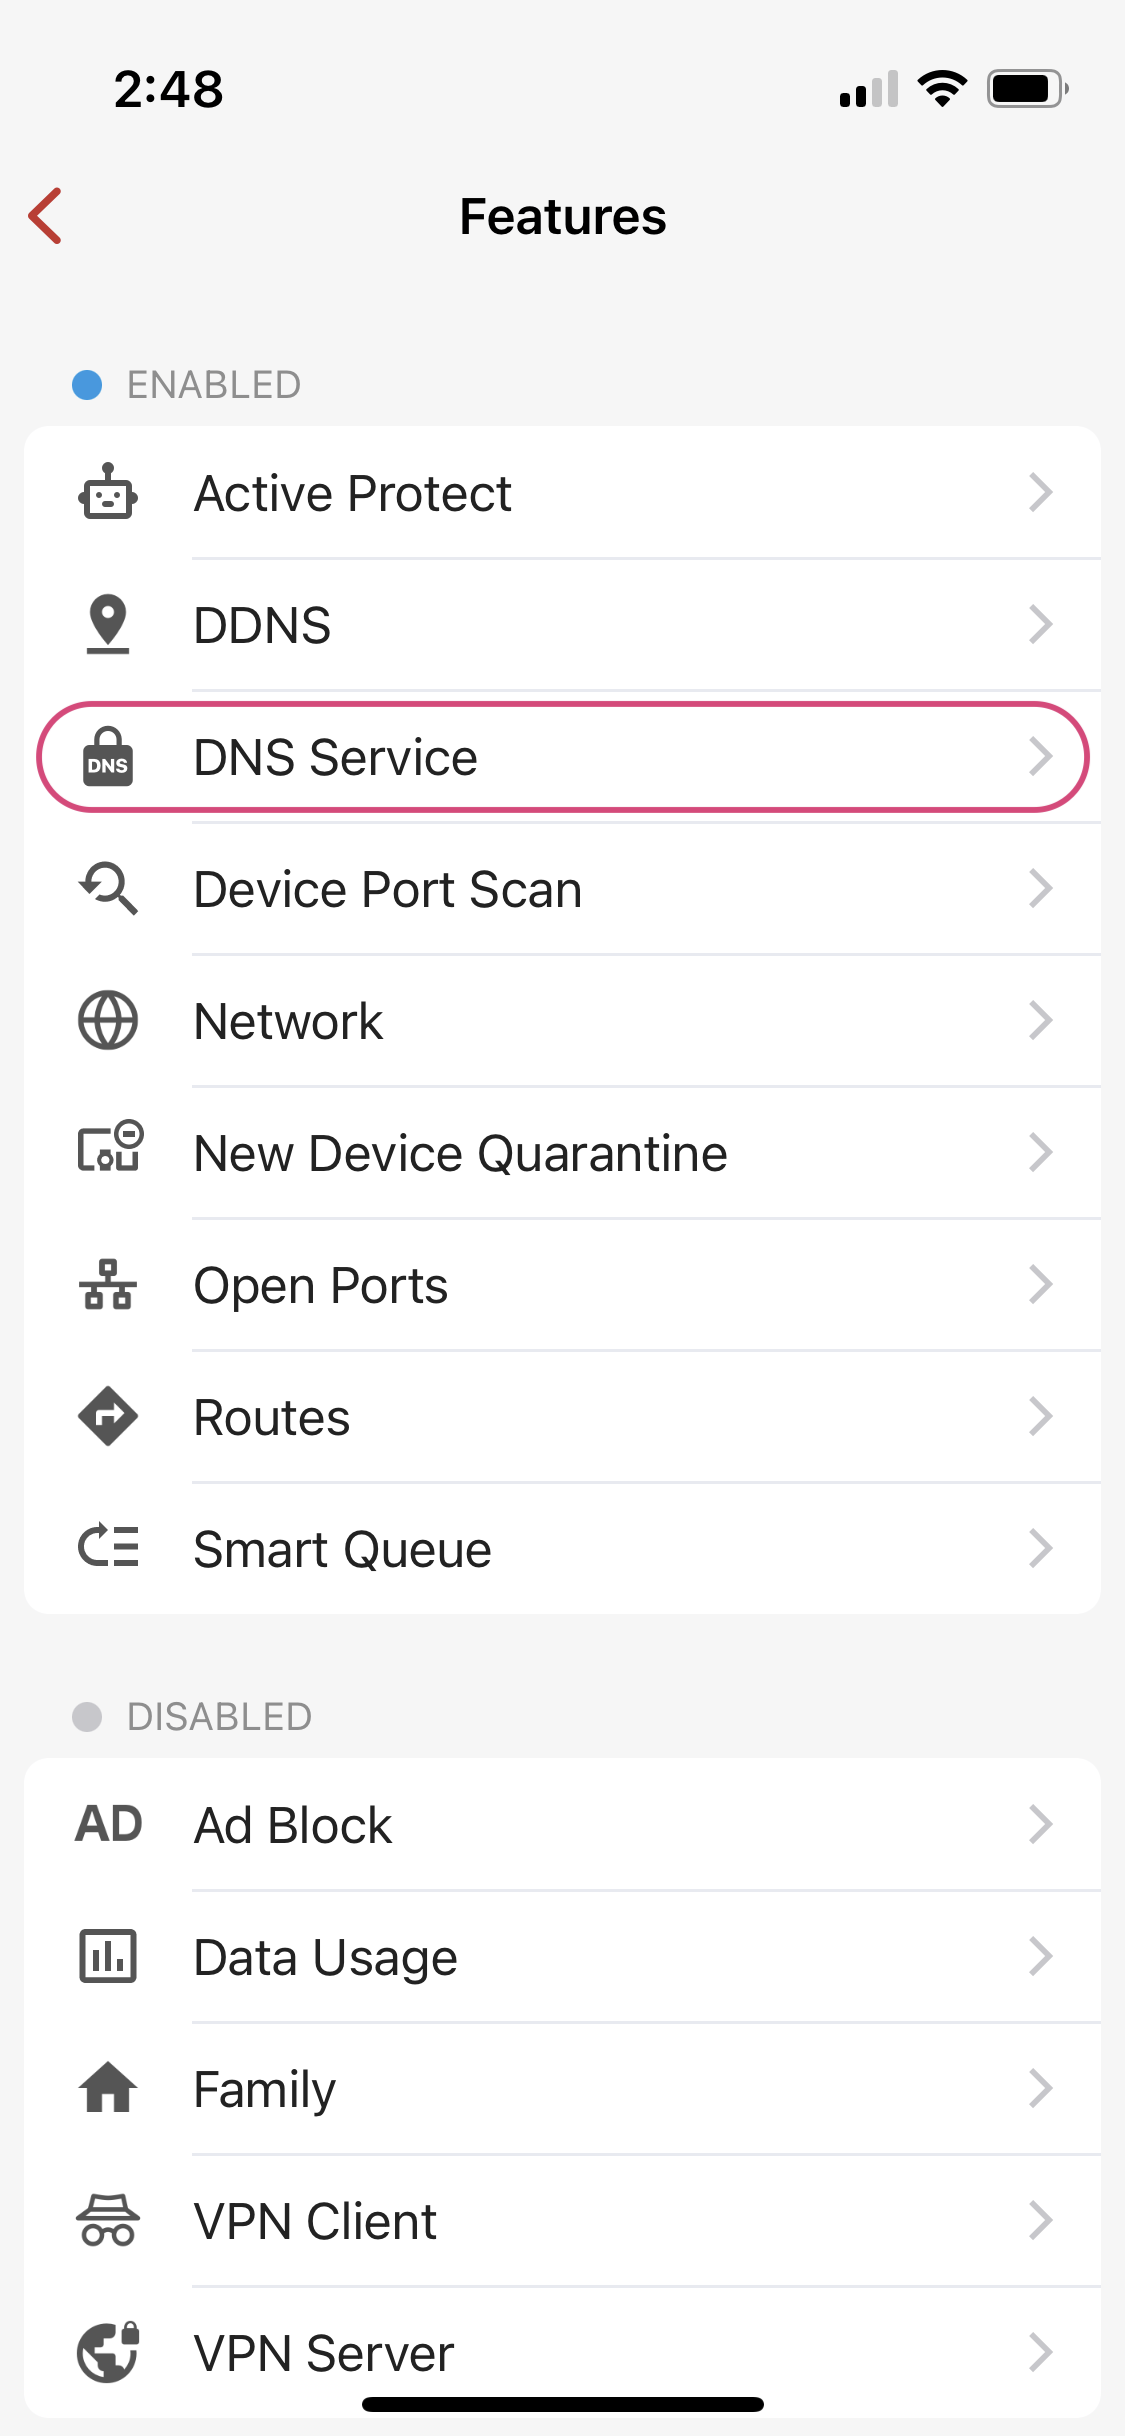 Select the DNS Service option